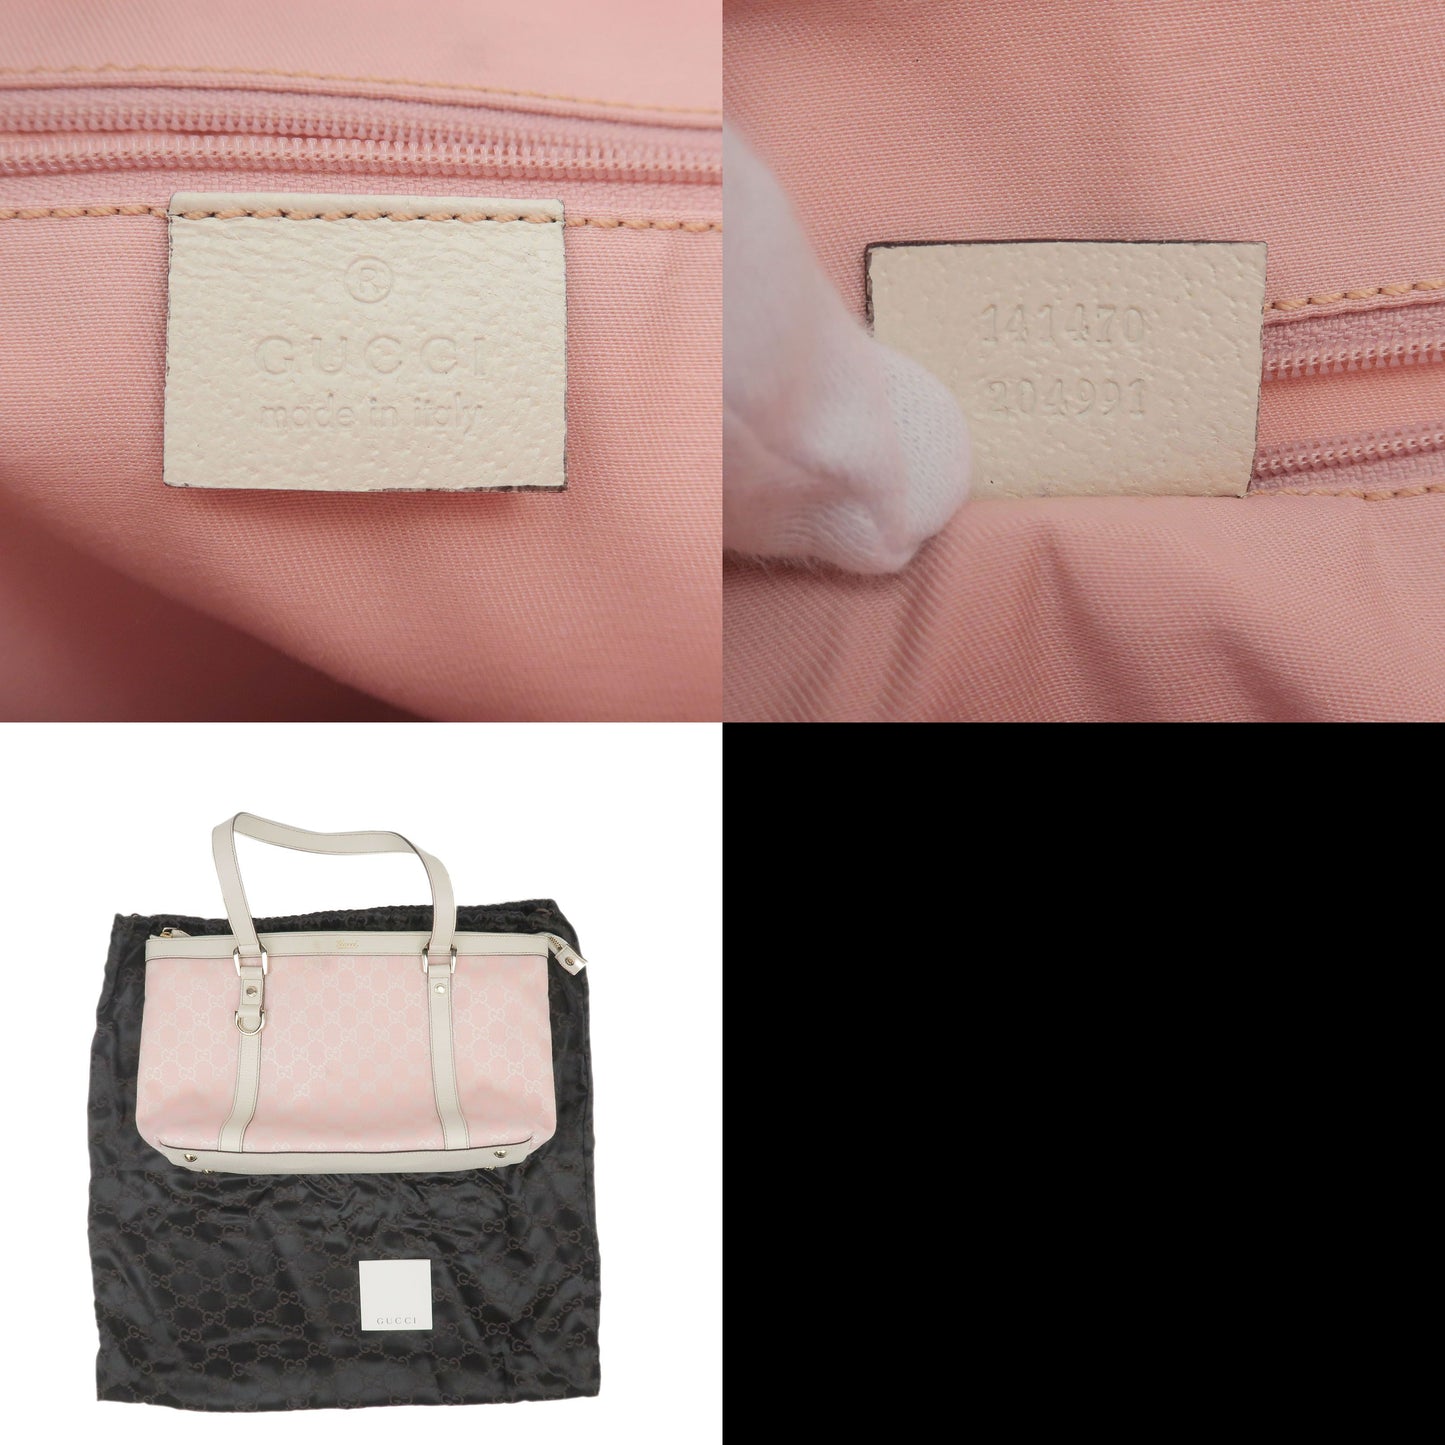 GUCCI GG Canvas Leather Tote Bag Pink White 141470